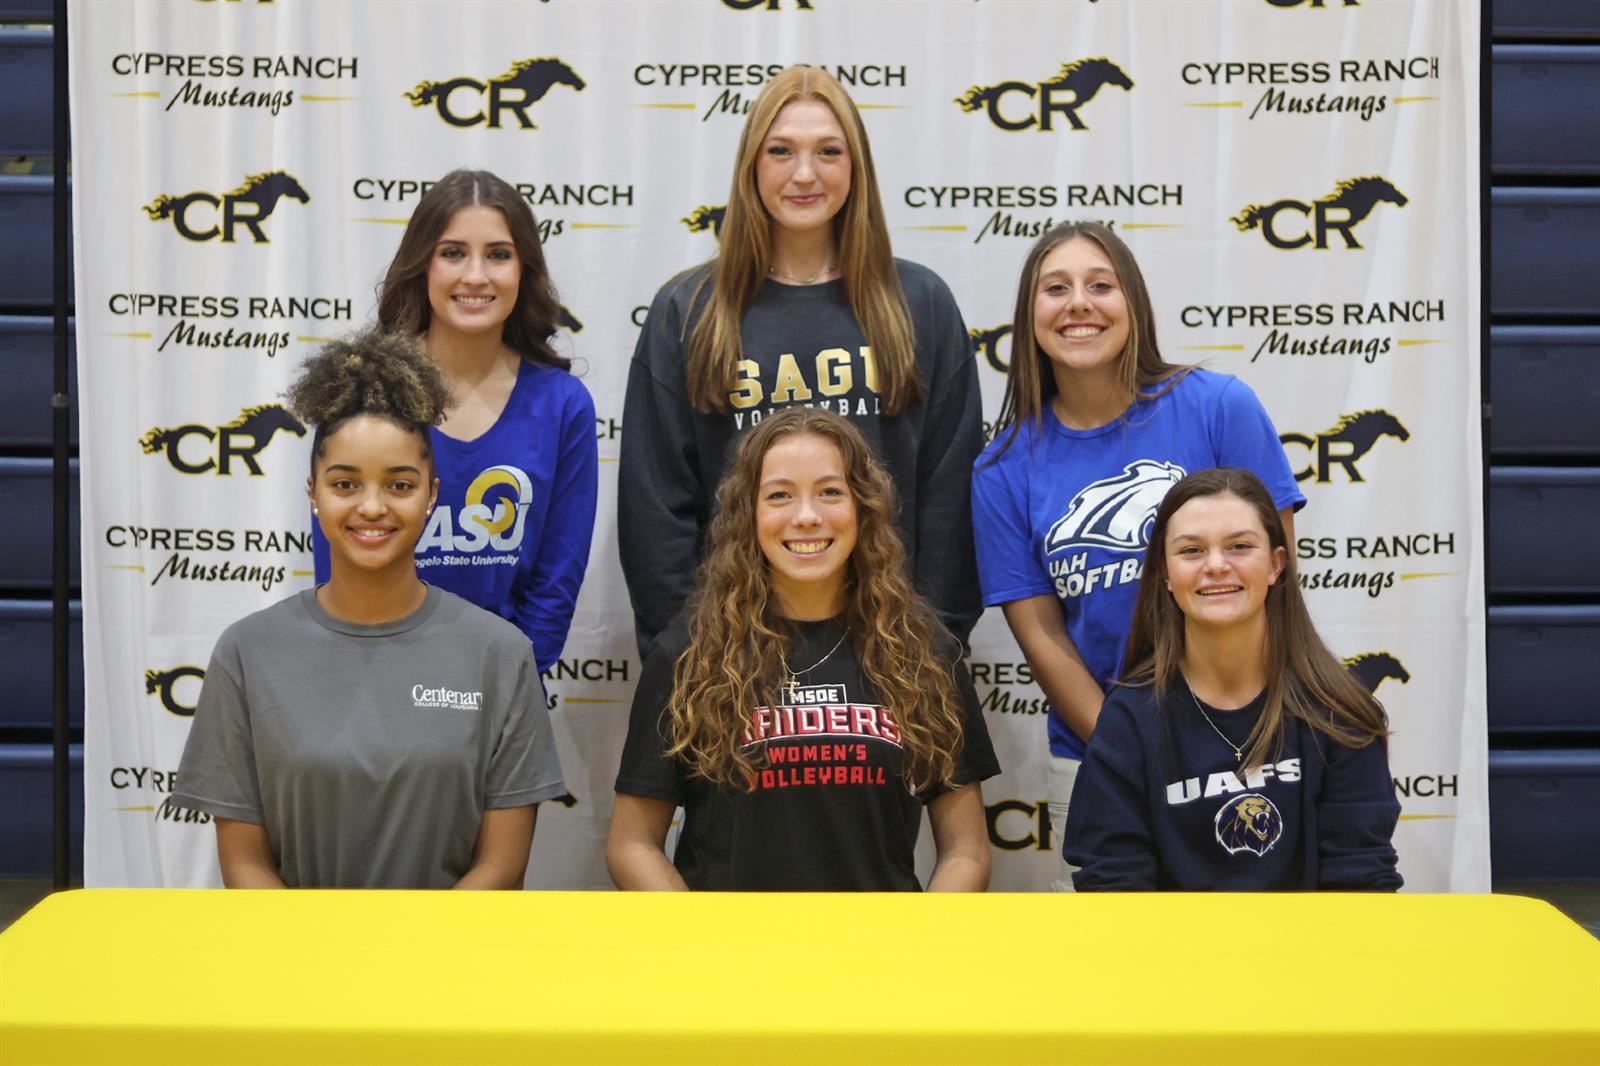 Six Cypress Ranch High School seniors were among 42 student-athletes across CFISD to sign letters of intent on the first day.